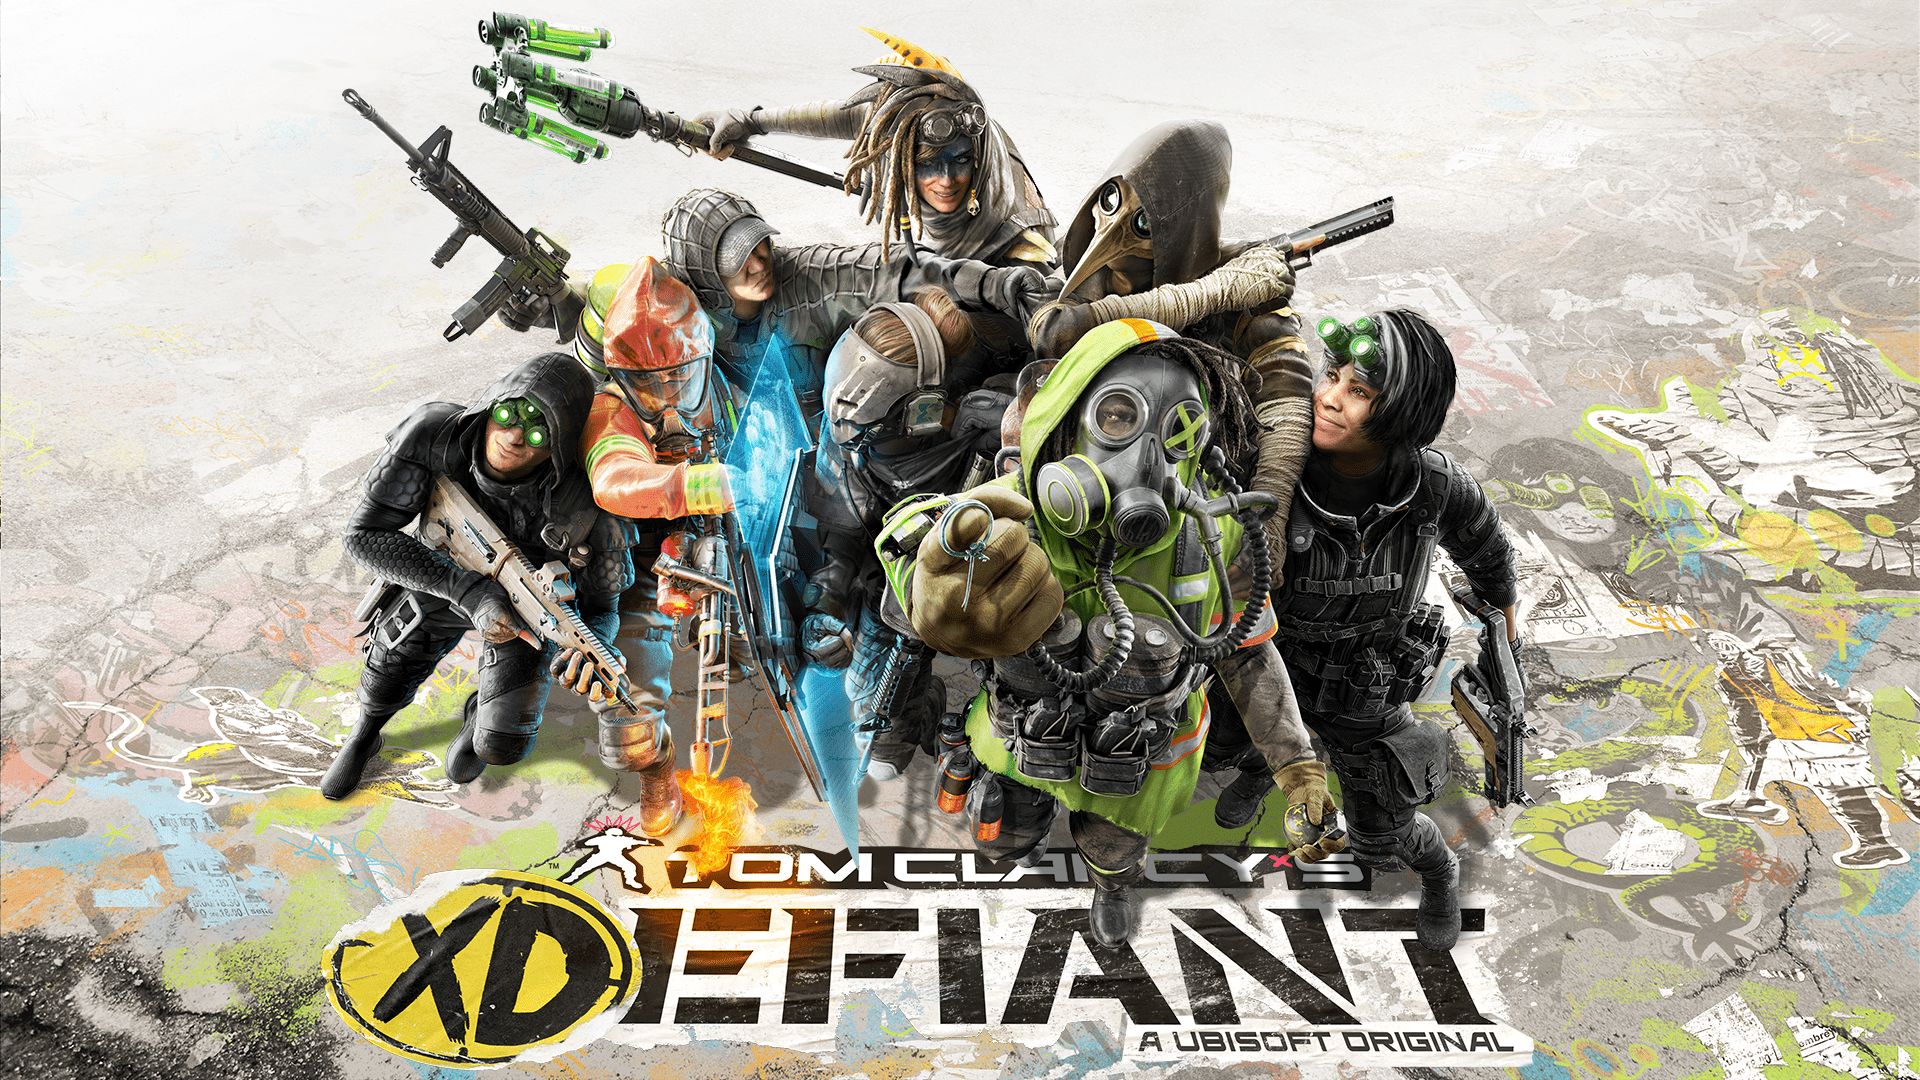 Ubisoft unveils new Free-to-play multiplayer FPS game called XDefiant